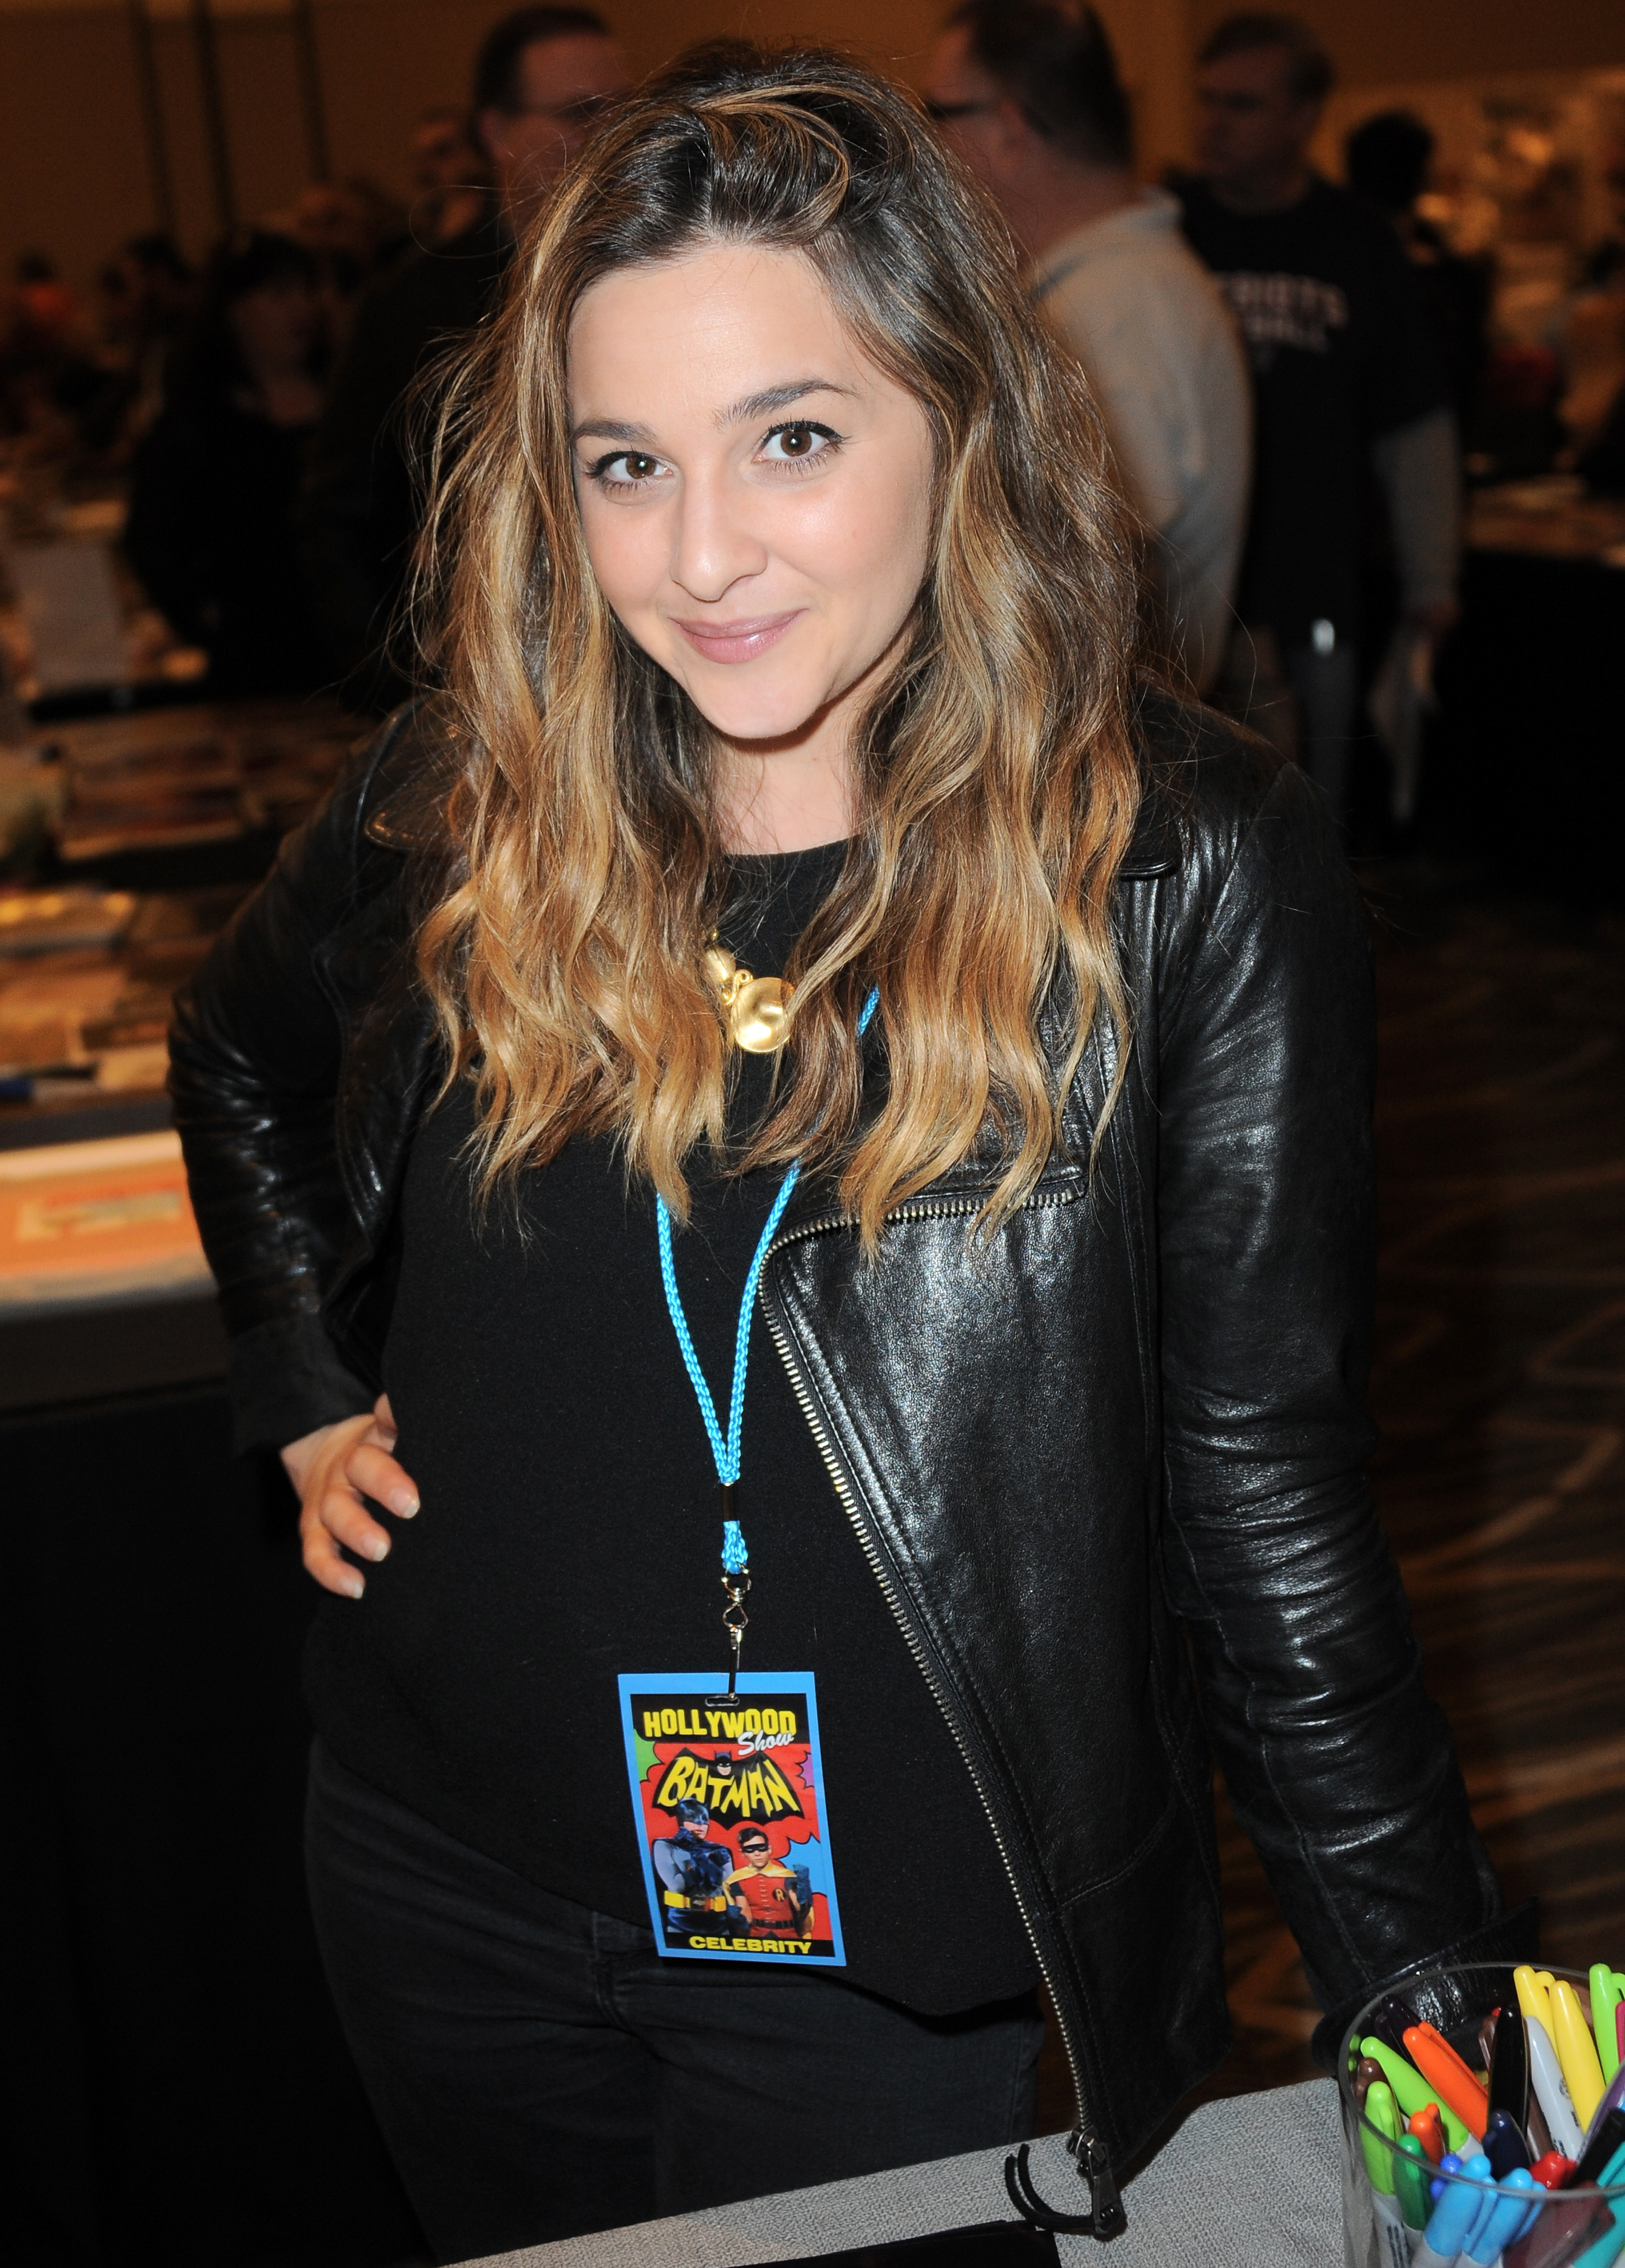 Alisan Porter at The Hollywood Show held in Los Angeles, California, on April 25, 2015. | Source: Getty Images